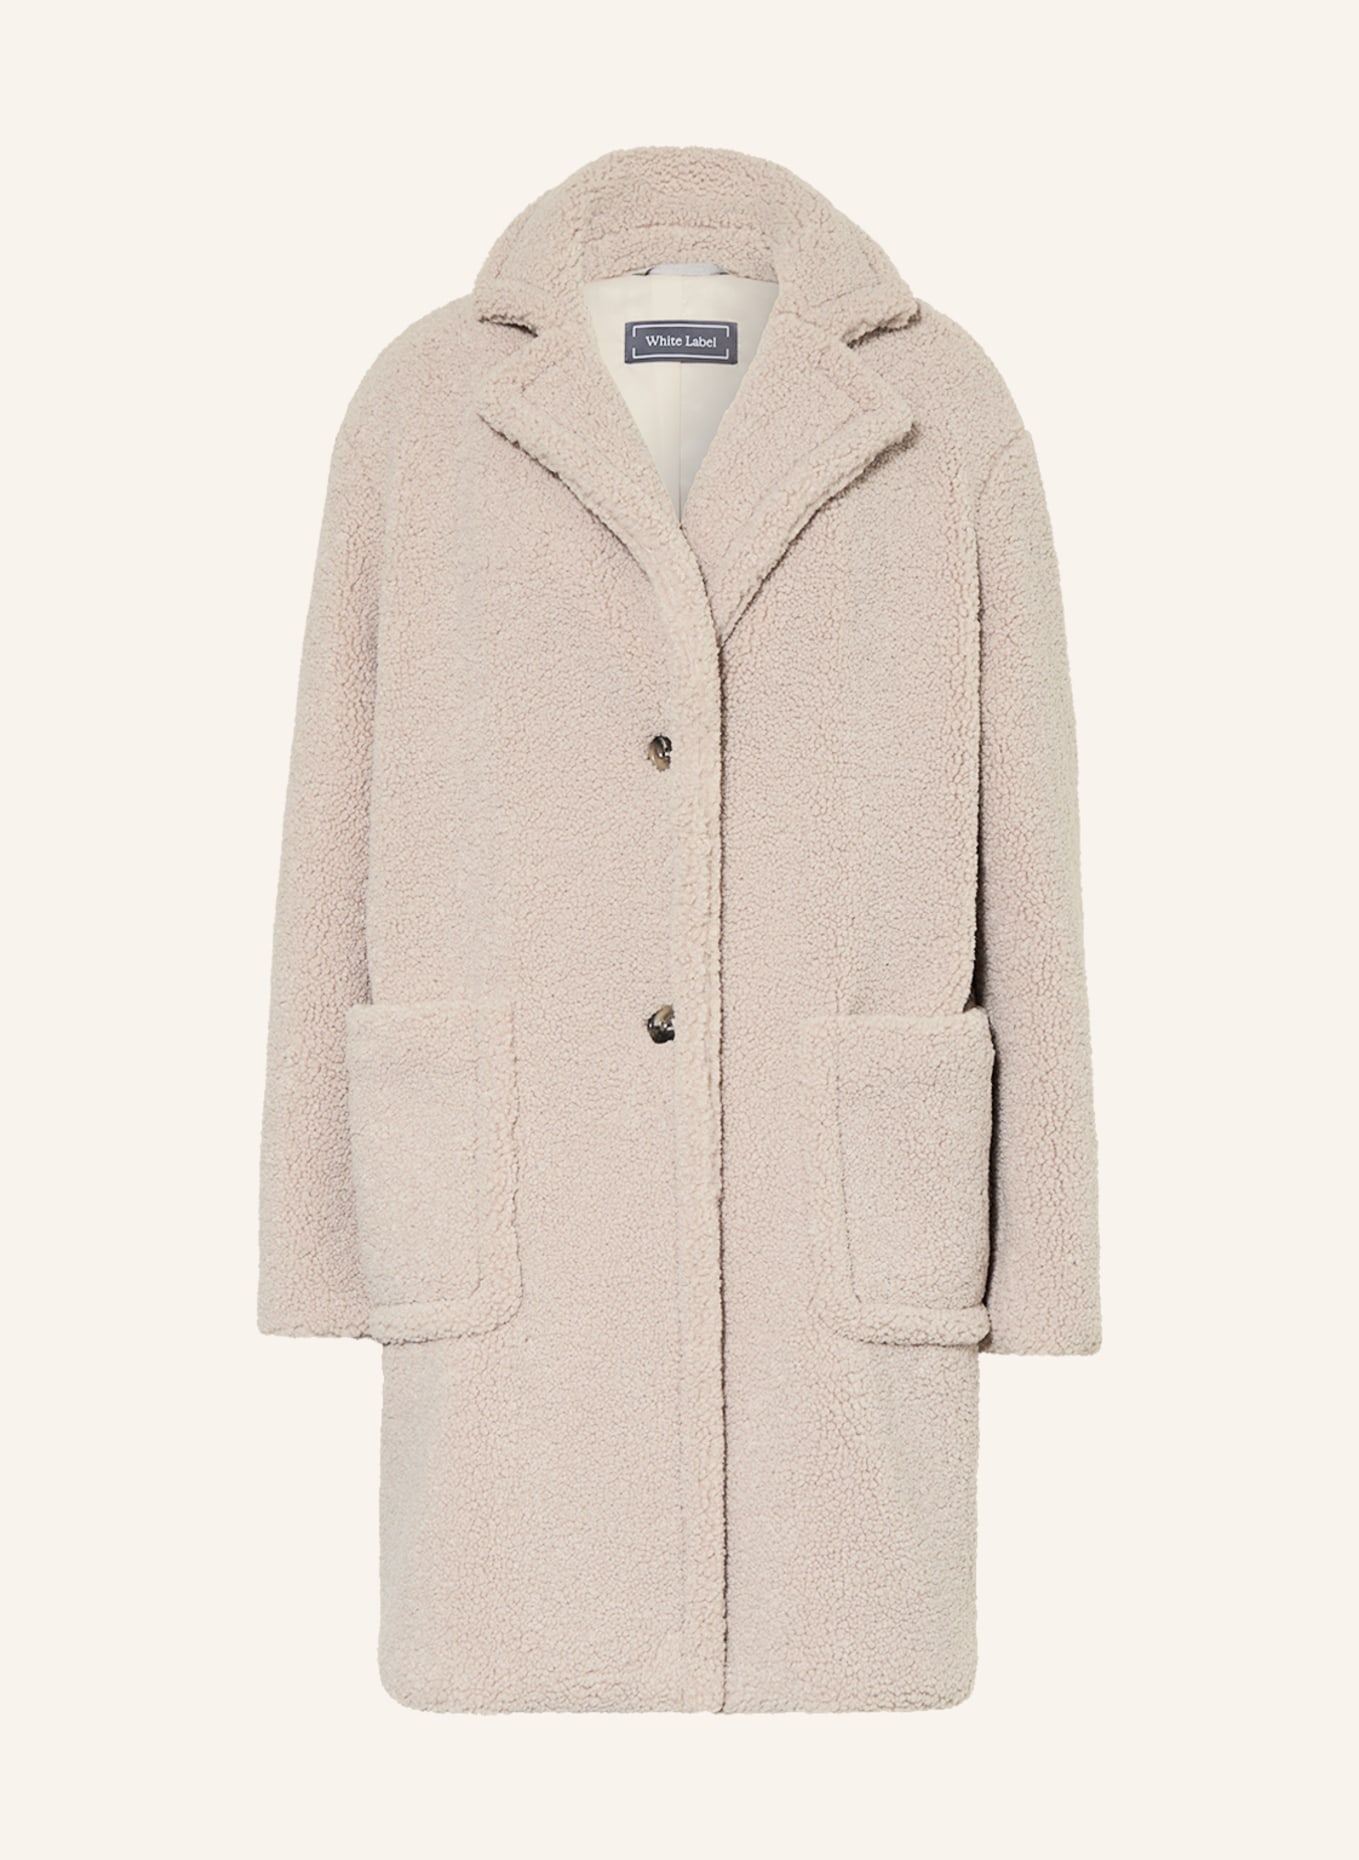 White Label Teddy coat, Color: TAUPE (Image 1)